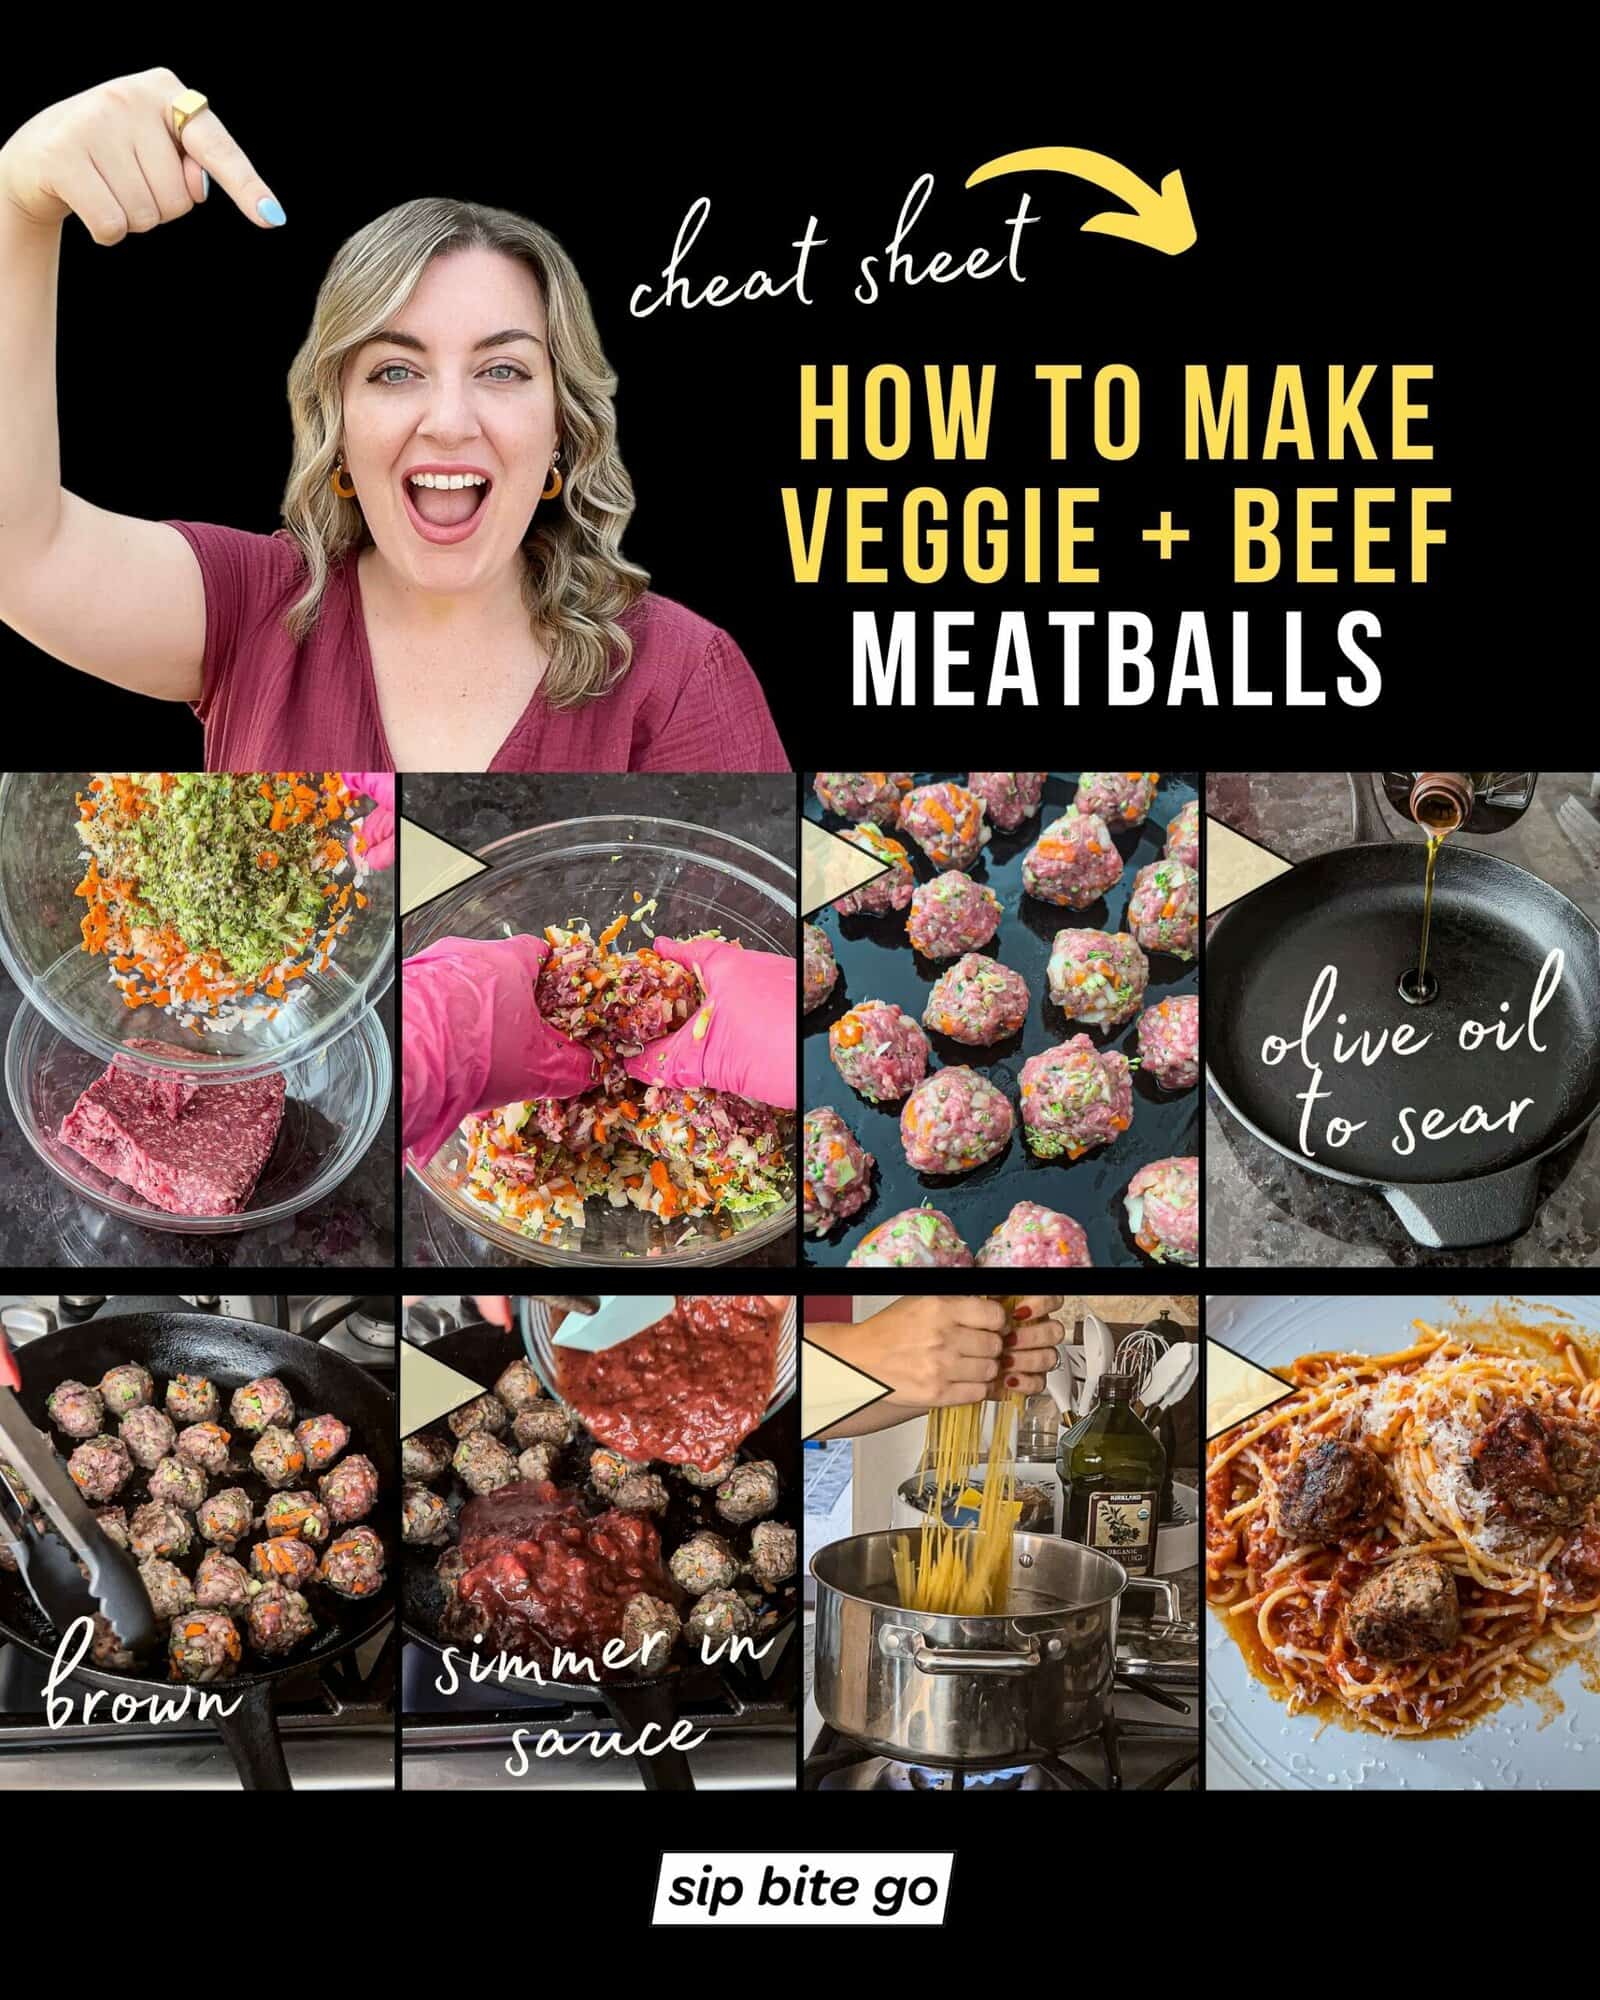 Infographic with caption and step by step recipe photos to make beef and veggie meatballs